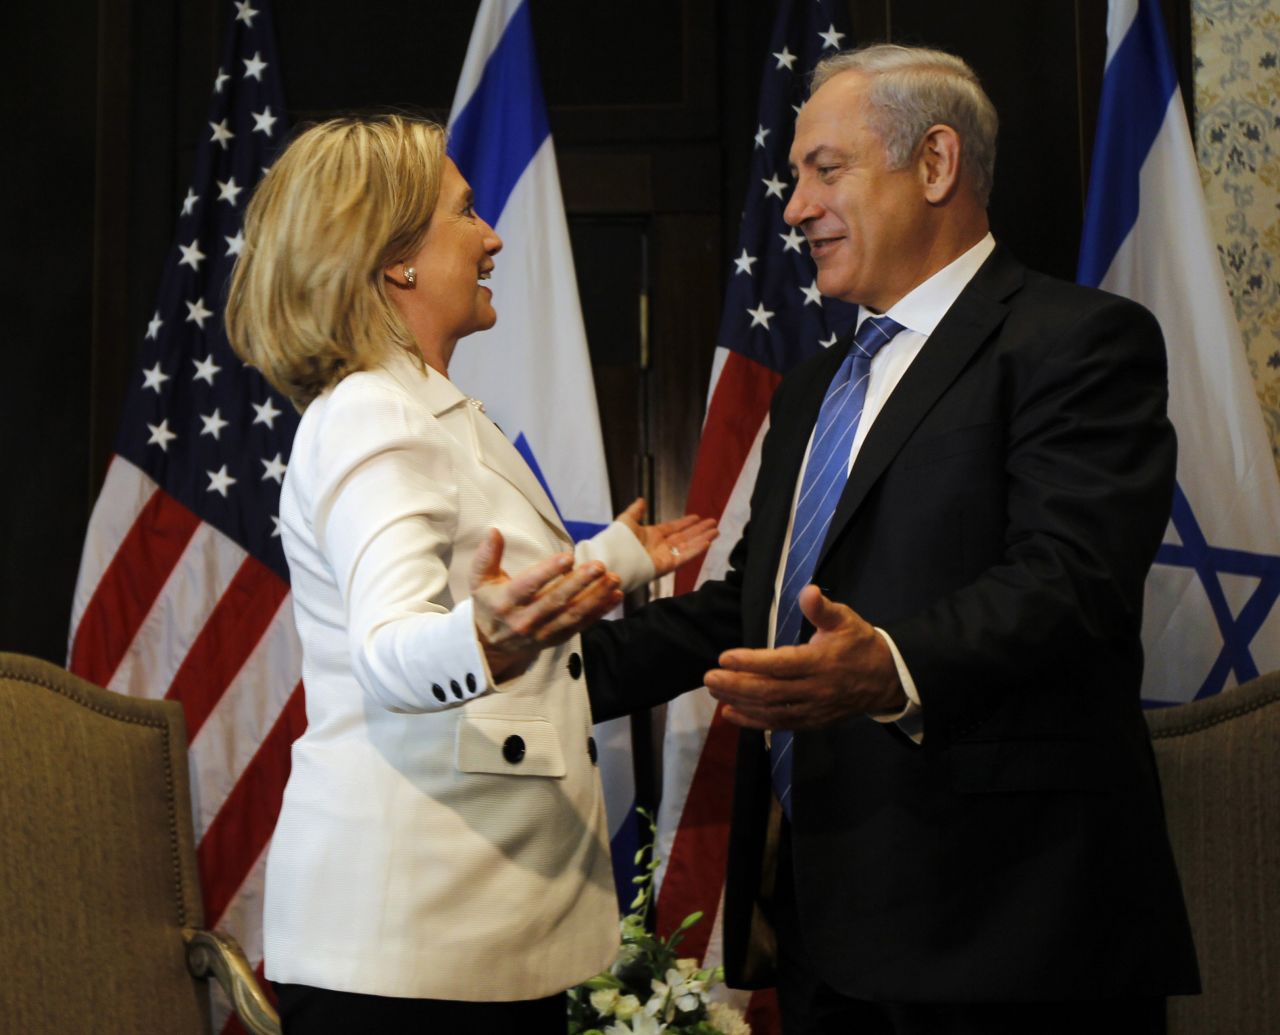 Clinton and Netanyahu greet each other in Sharm el-Sheikh, Egypt, on September 14, 2010, during a second round of Middle East peace talks.